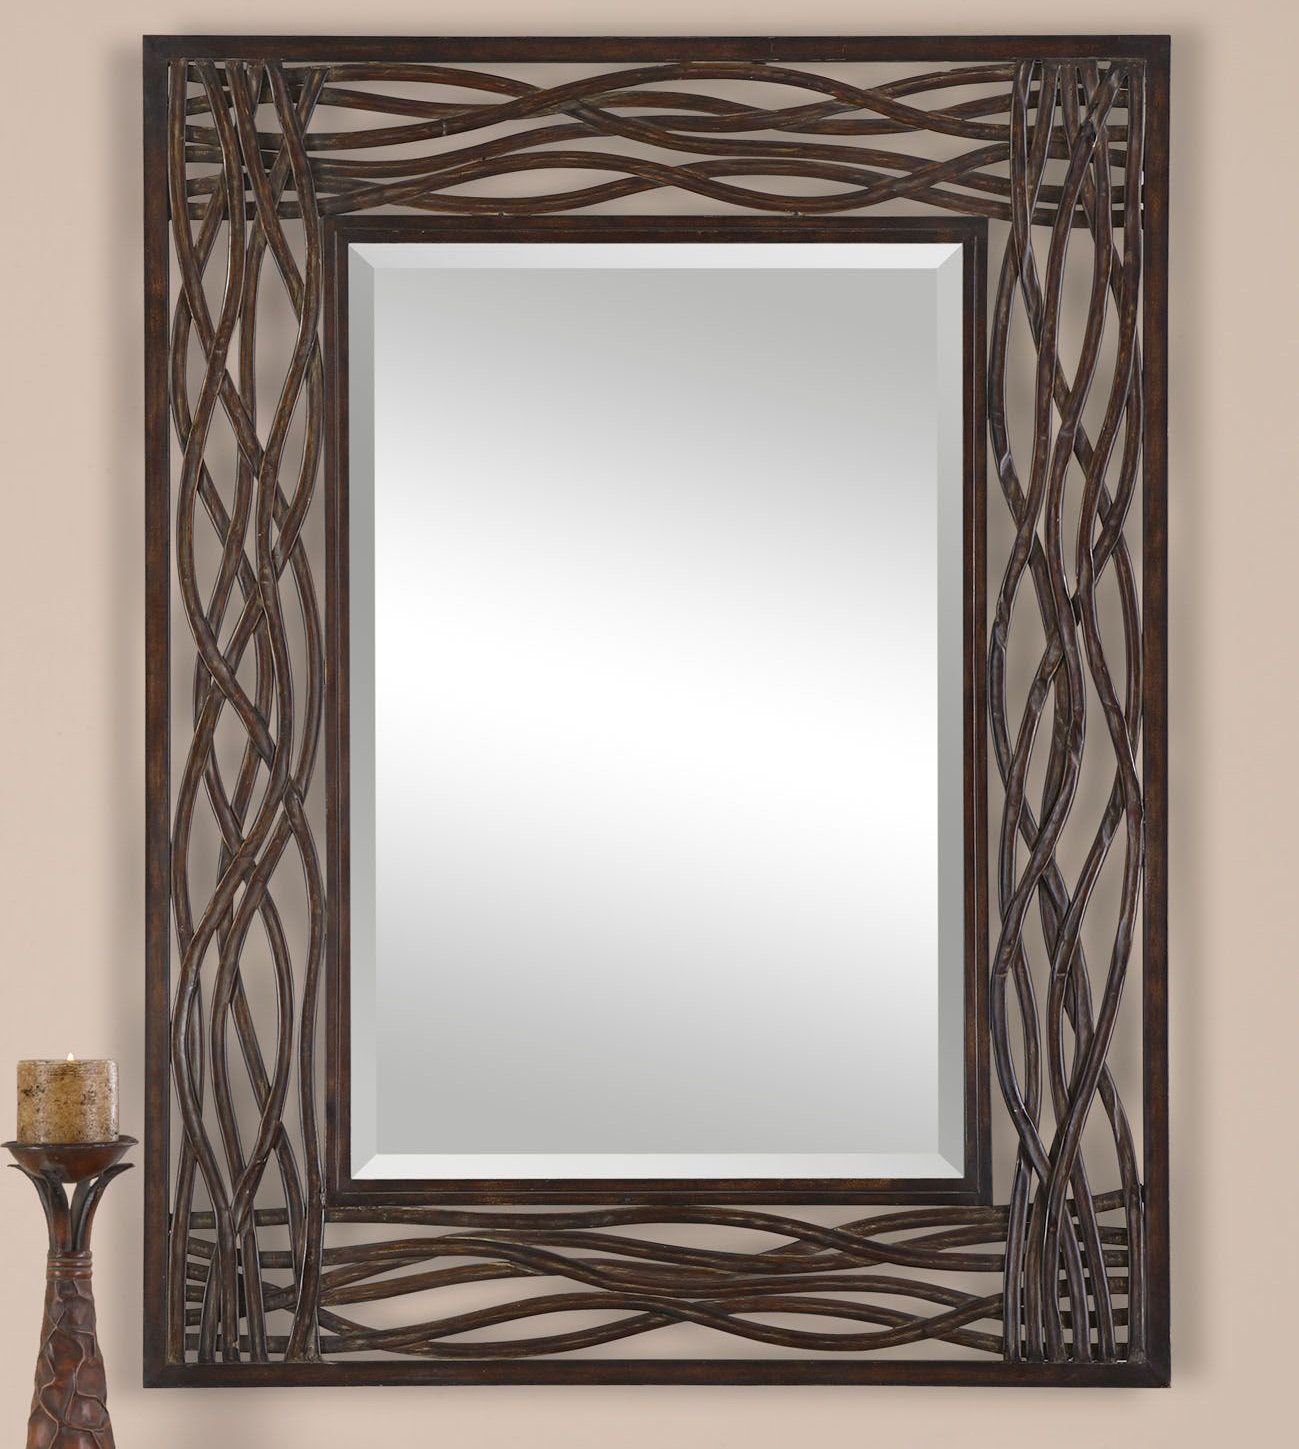 Farmhouse & Rustic World Menagerie Wall & Accent Mirrors Inside Eriq Framed Wall Mirrors (View 11 of 20)